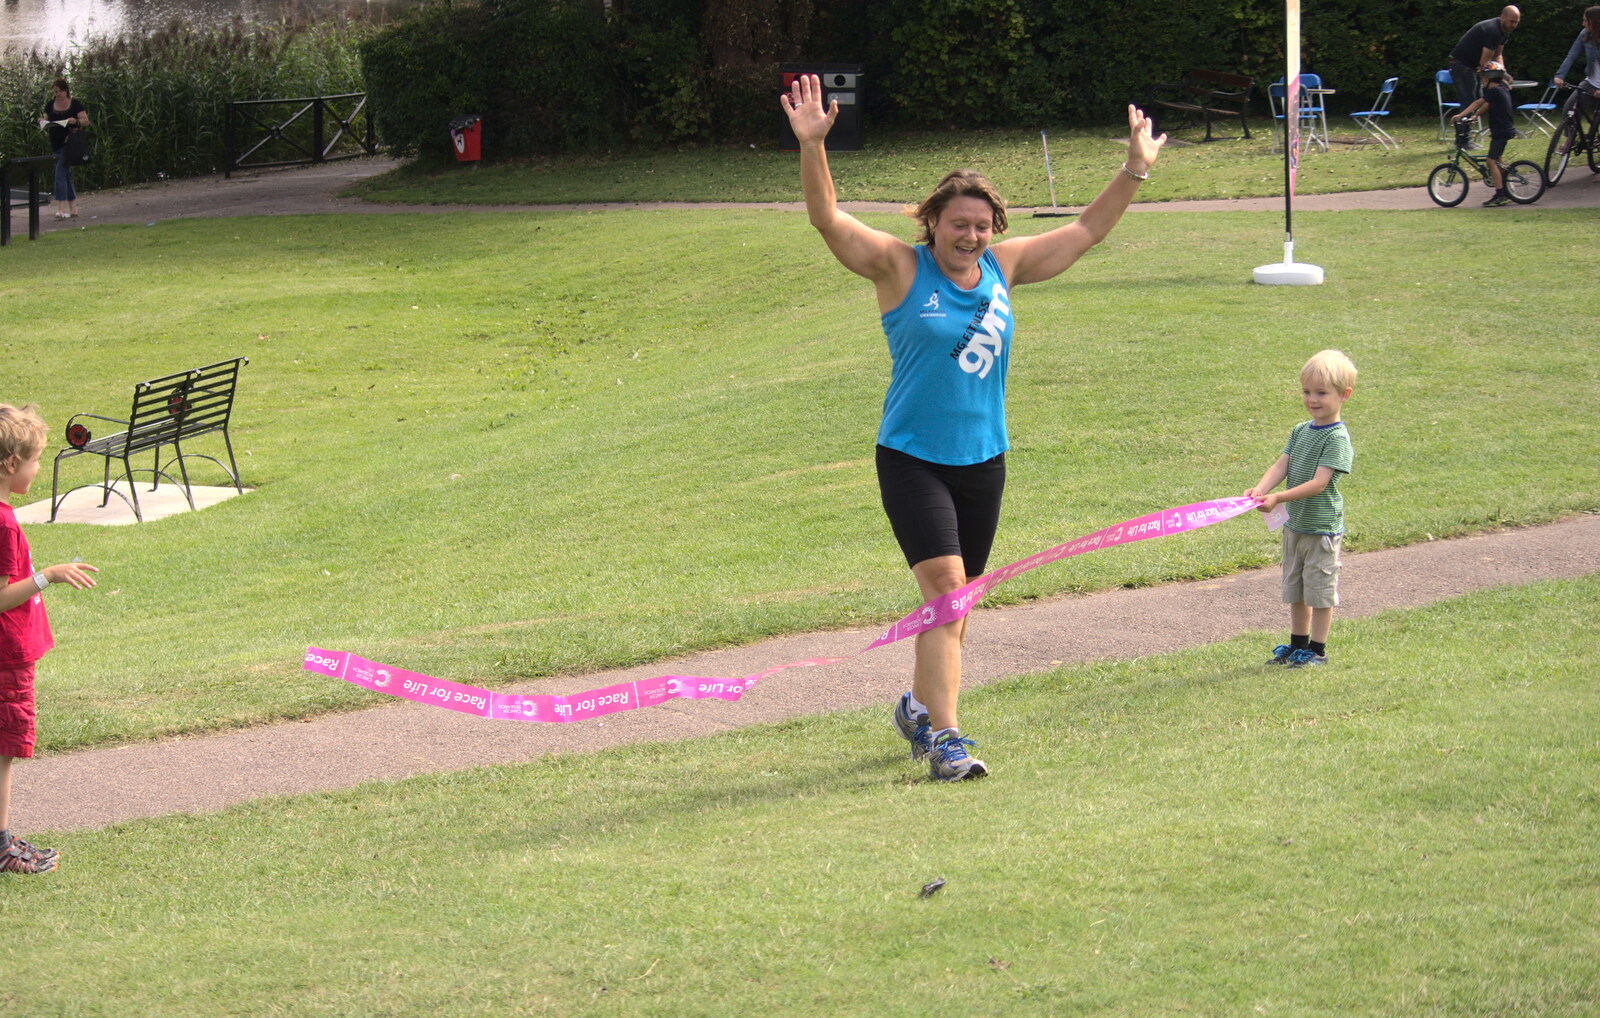 Harry holds on to the finishing tape from A Race For Life, The Park, Diss, Norfolk - 16th August 2015